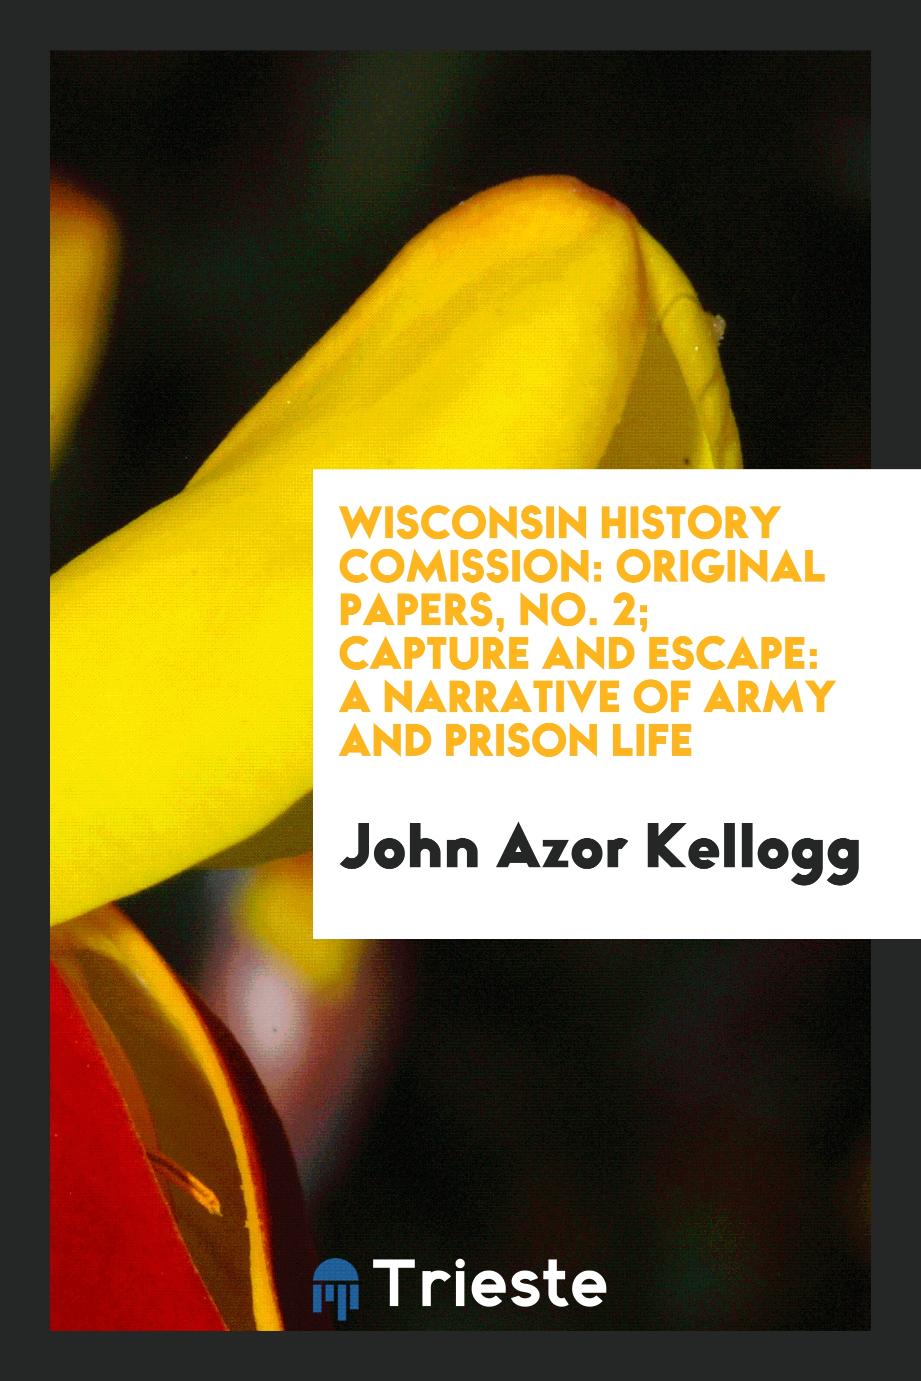 Wisconsin History Comission: Original Papers, No. 2; Capture and Escape: A Narrative of Army and Prison Life